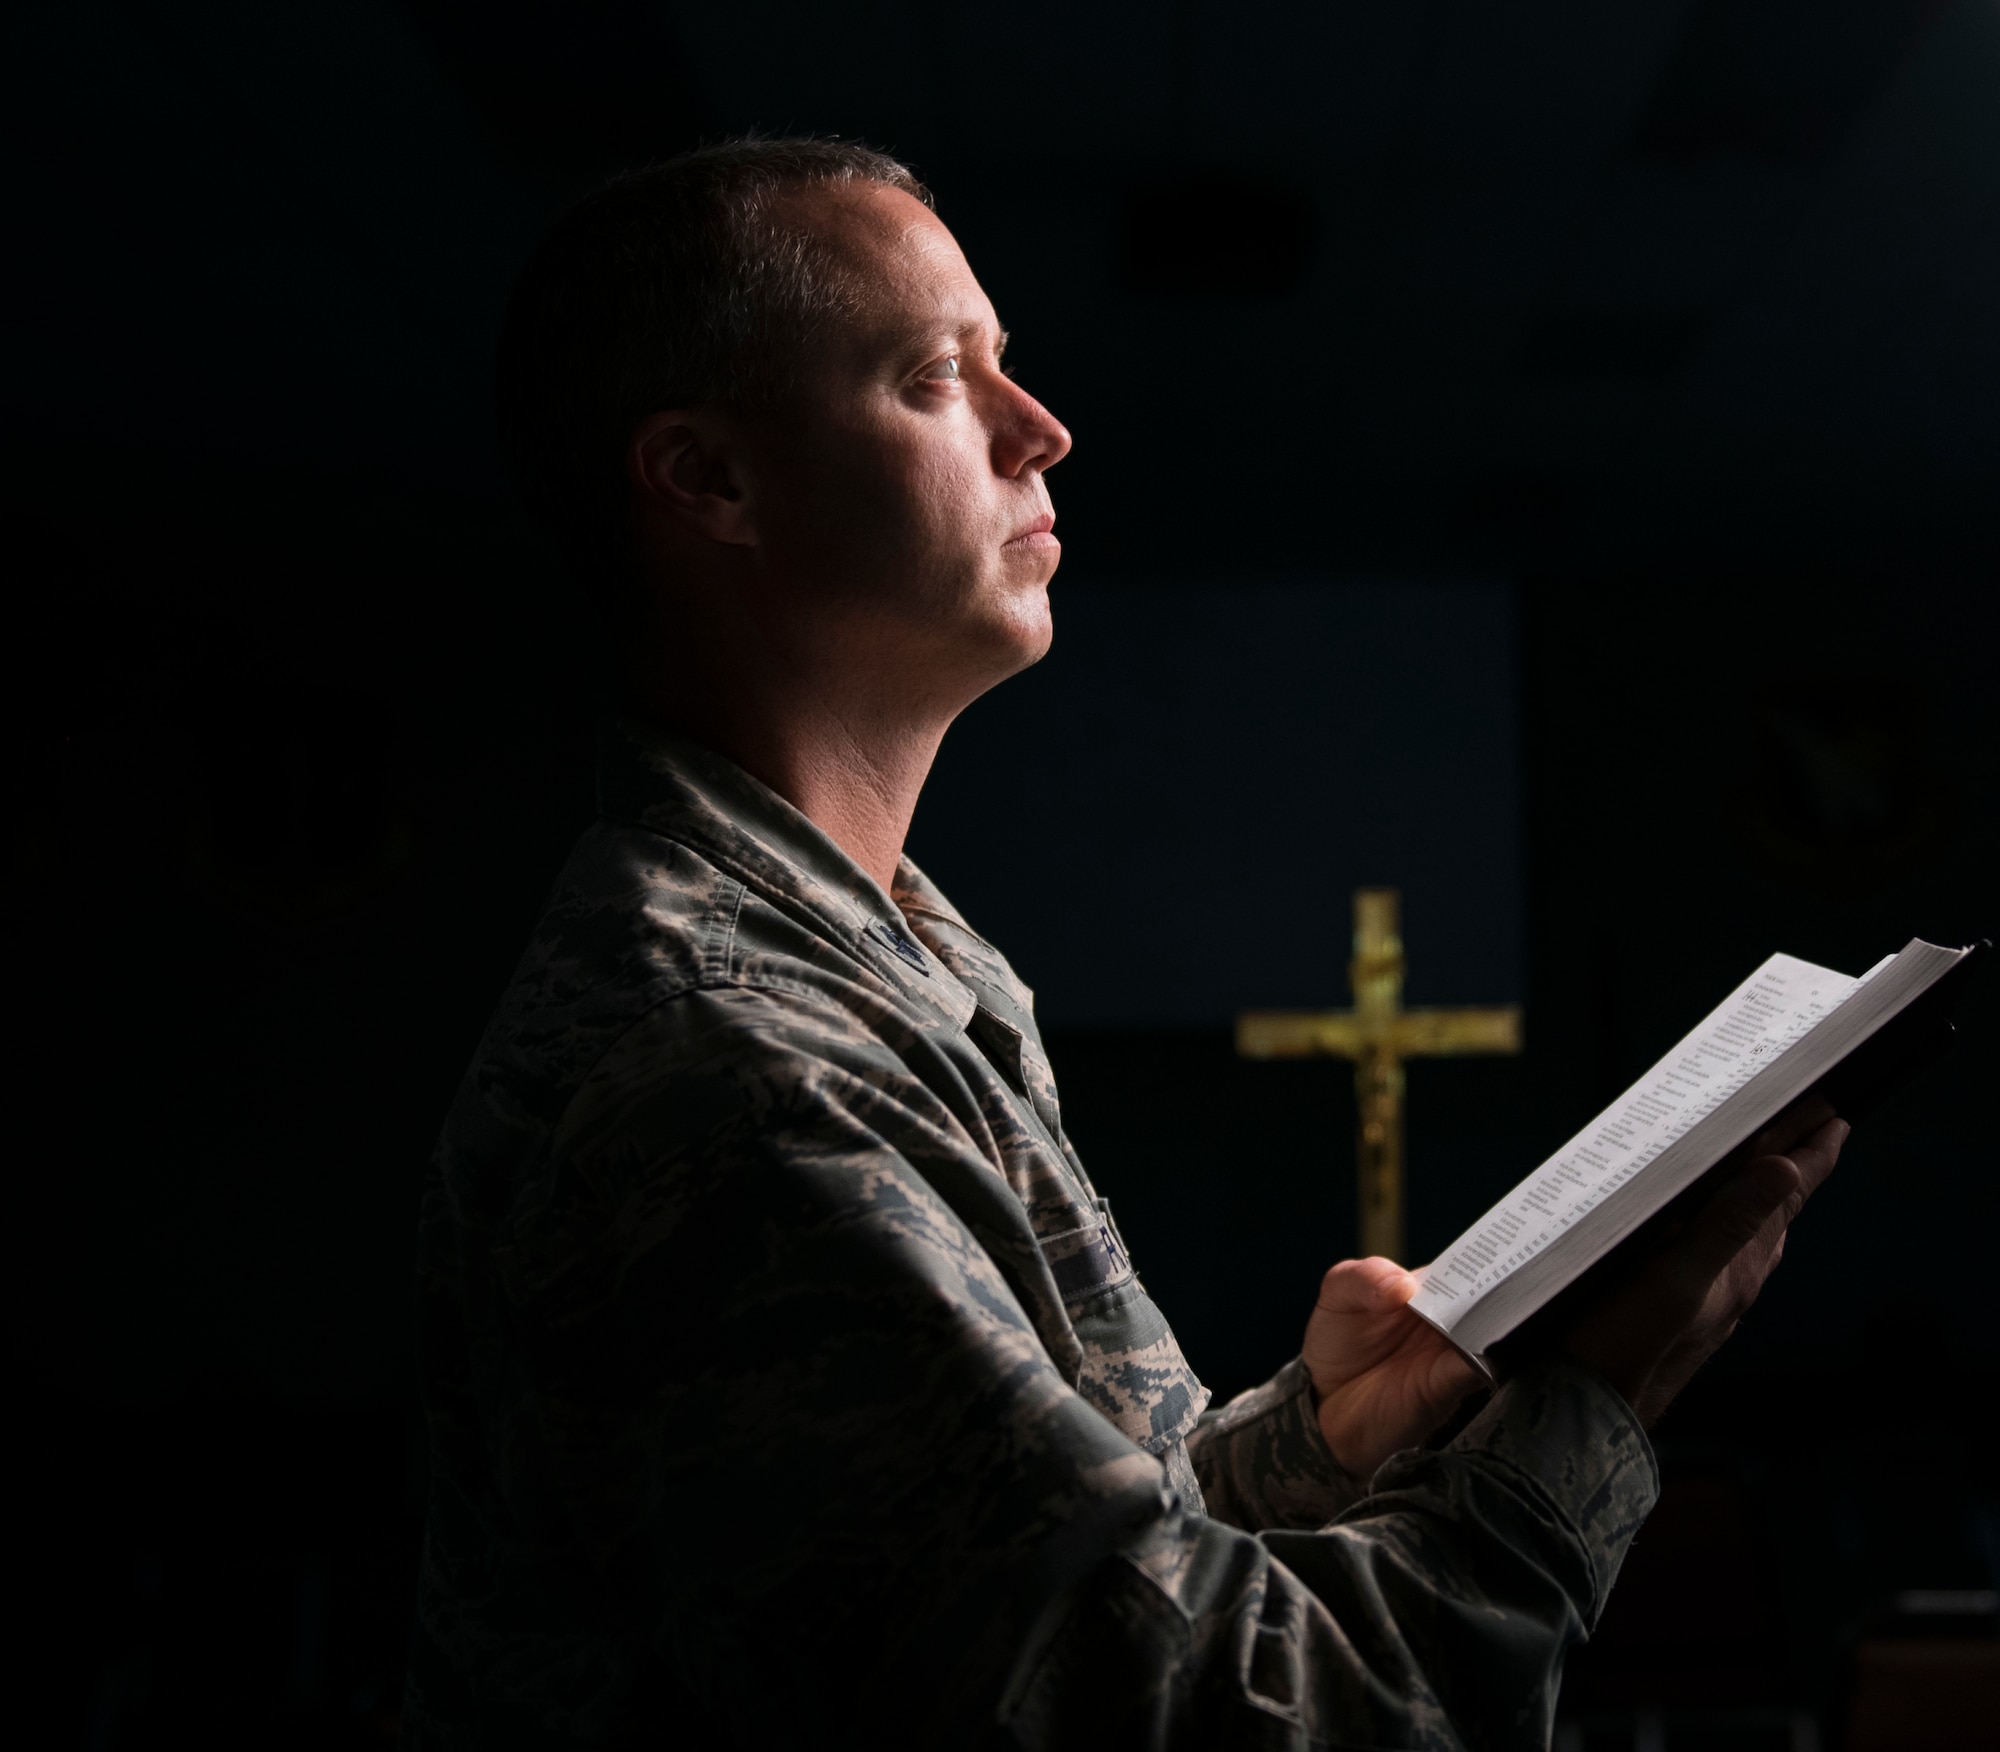 U.S. Air Force Lt. Col. Michael N. Frese, 122nd Fighter Wing chaplain, Indiana Air National Guard, poses for a portrait June 18, 2020, at the Indiana Air National Guard base, Fort Wayne, Indiana. The 122nd FW Chaplains Office has a responsibility to both provide, and provide for the freedom of religion and has 100% confidentiality. (U.S. Air National Guard photo by Staff Sgt. Rita Jimenez)